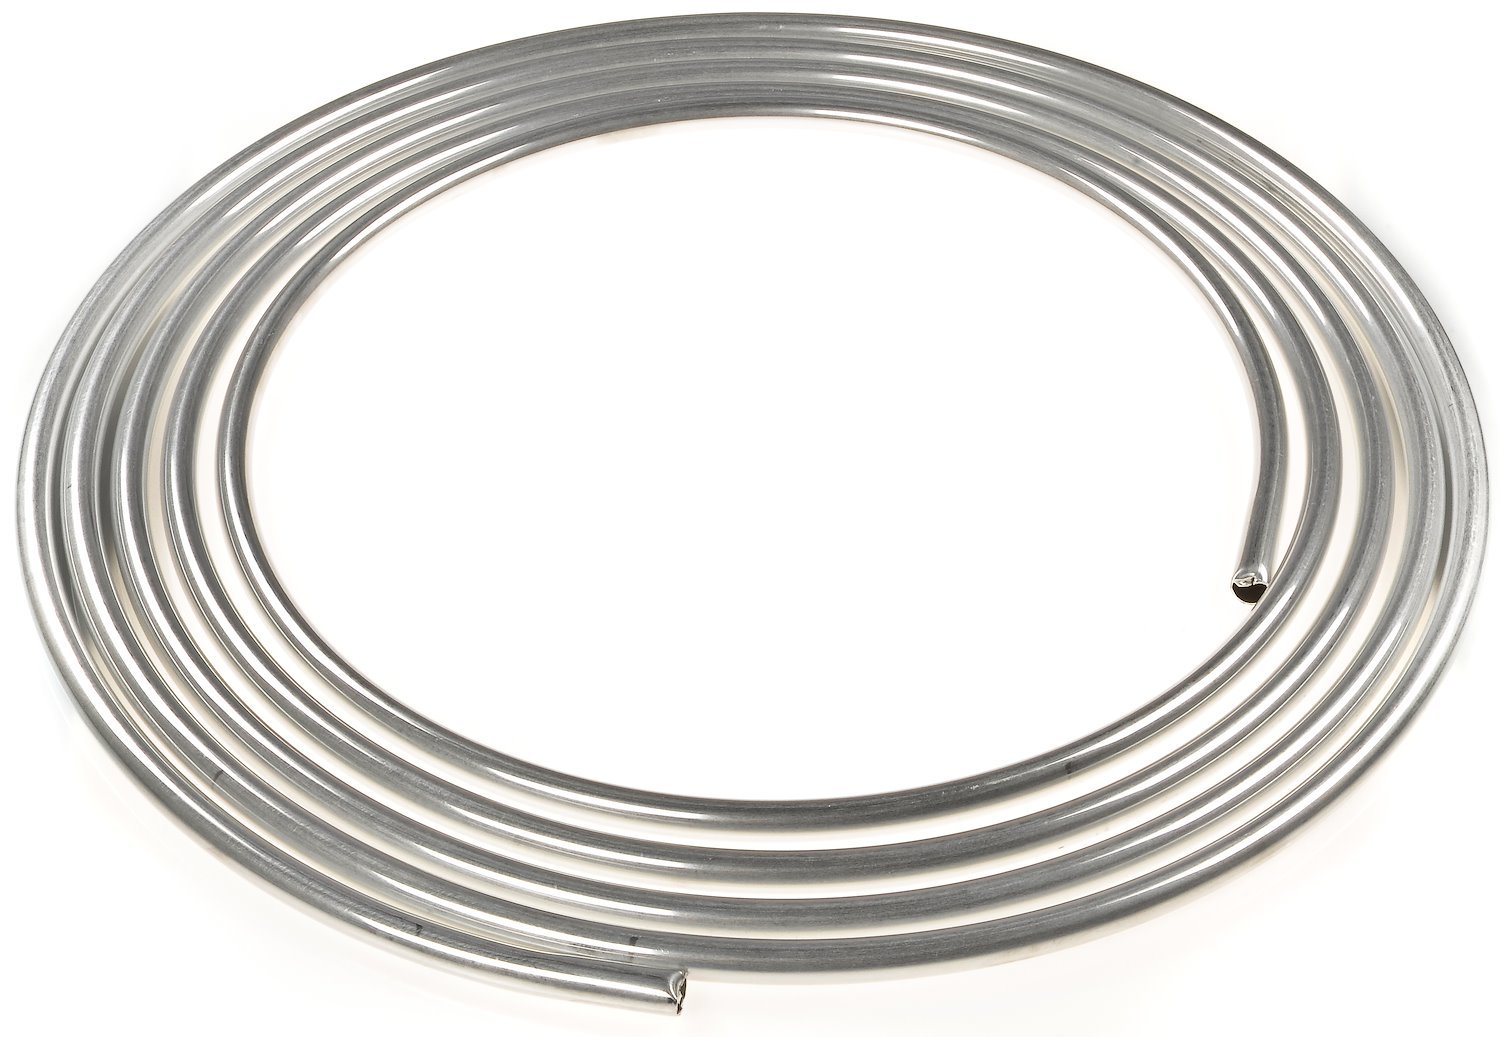 Aluminum Fuel Line [5/8 in. OD x 0.035 in. Wall]